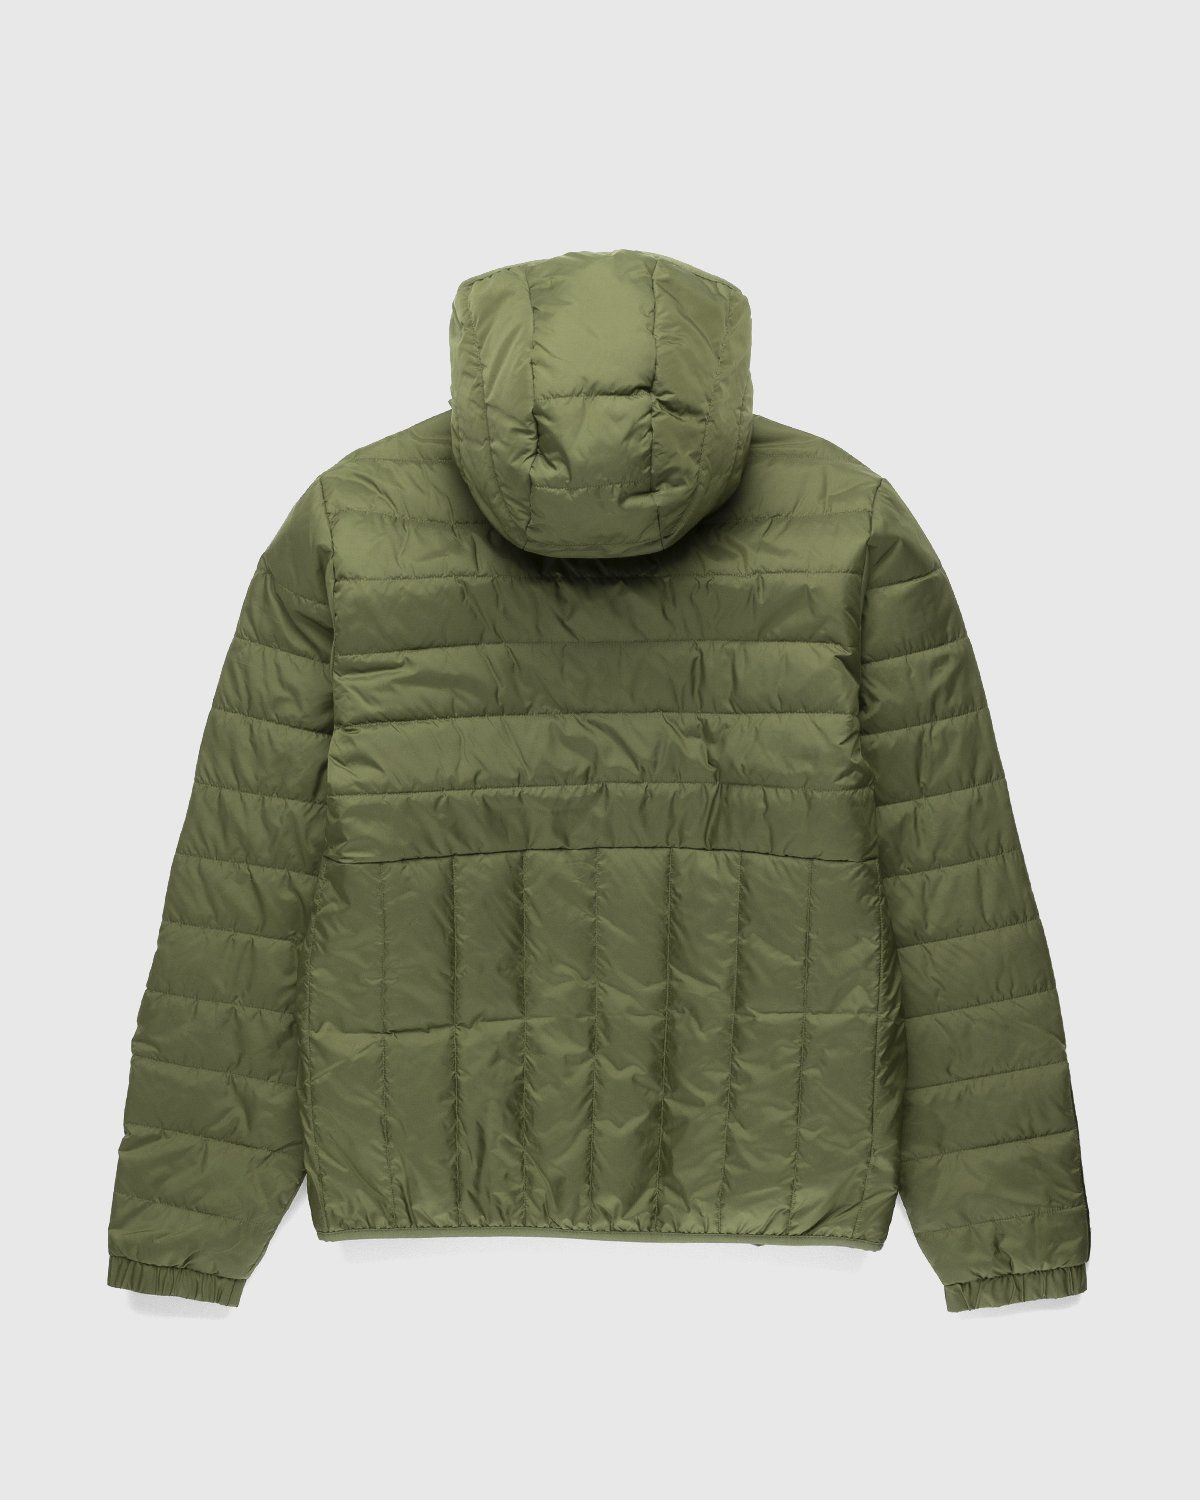 Adidas – Itavic 3-Stripes Midweight Hooded Jacket Olive - Down Jackets - Green - Image 2